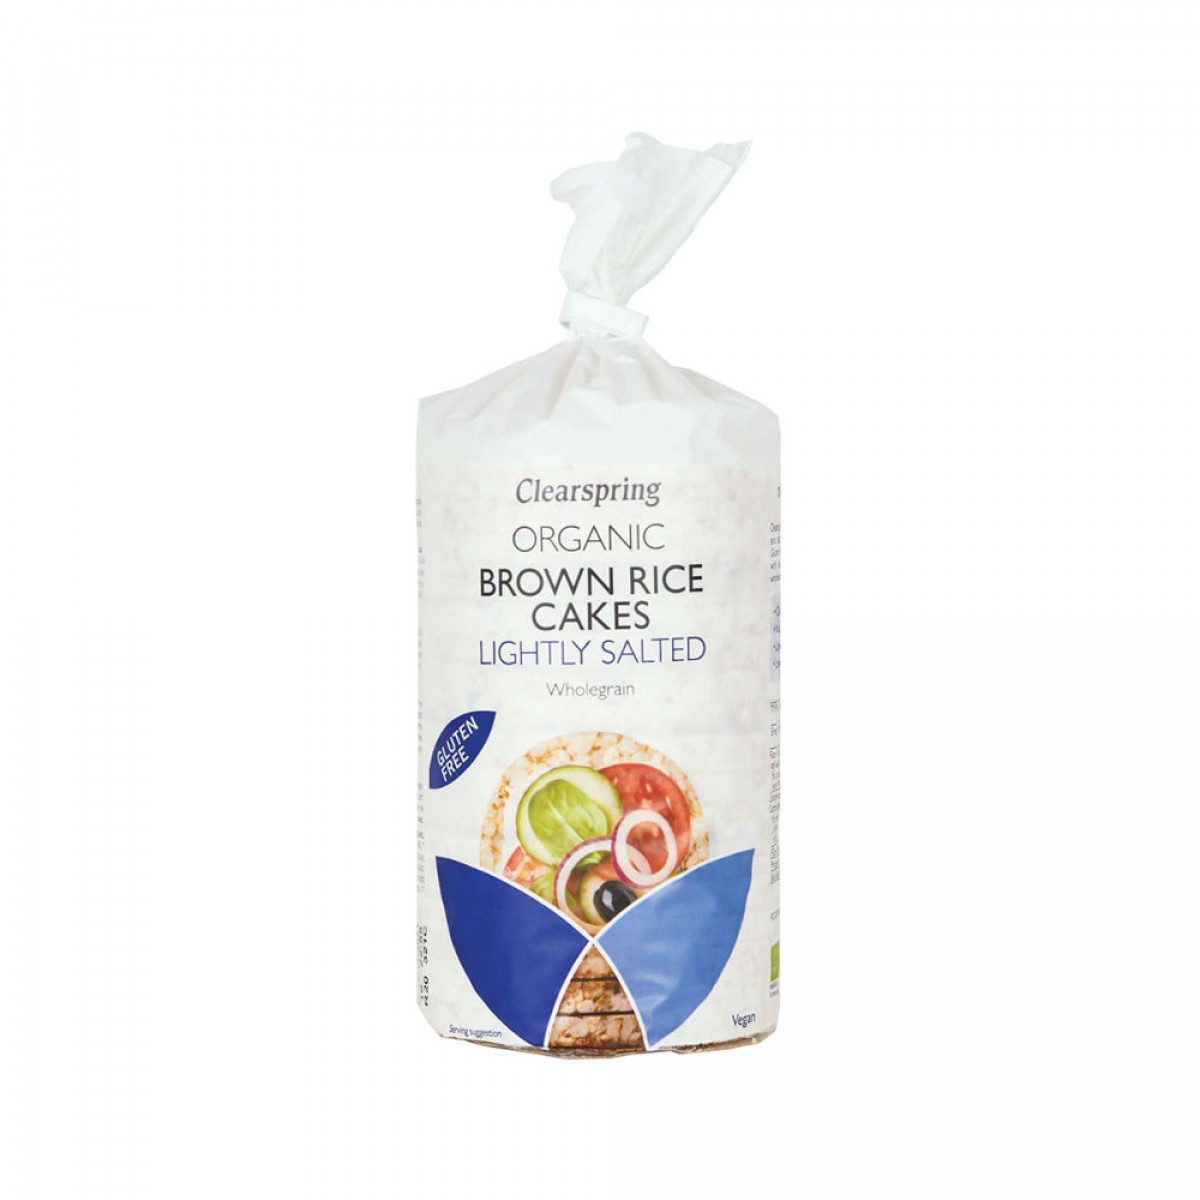 Product picture for Brown Rice Cakes - Lightly Salted